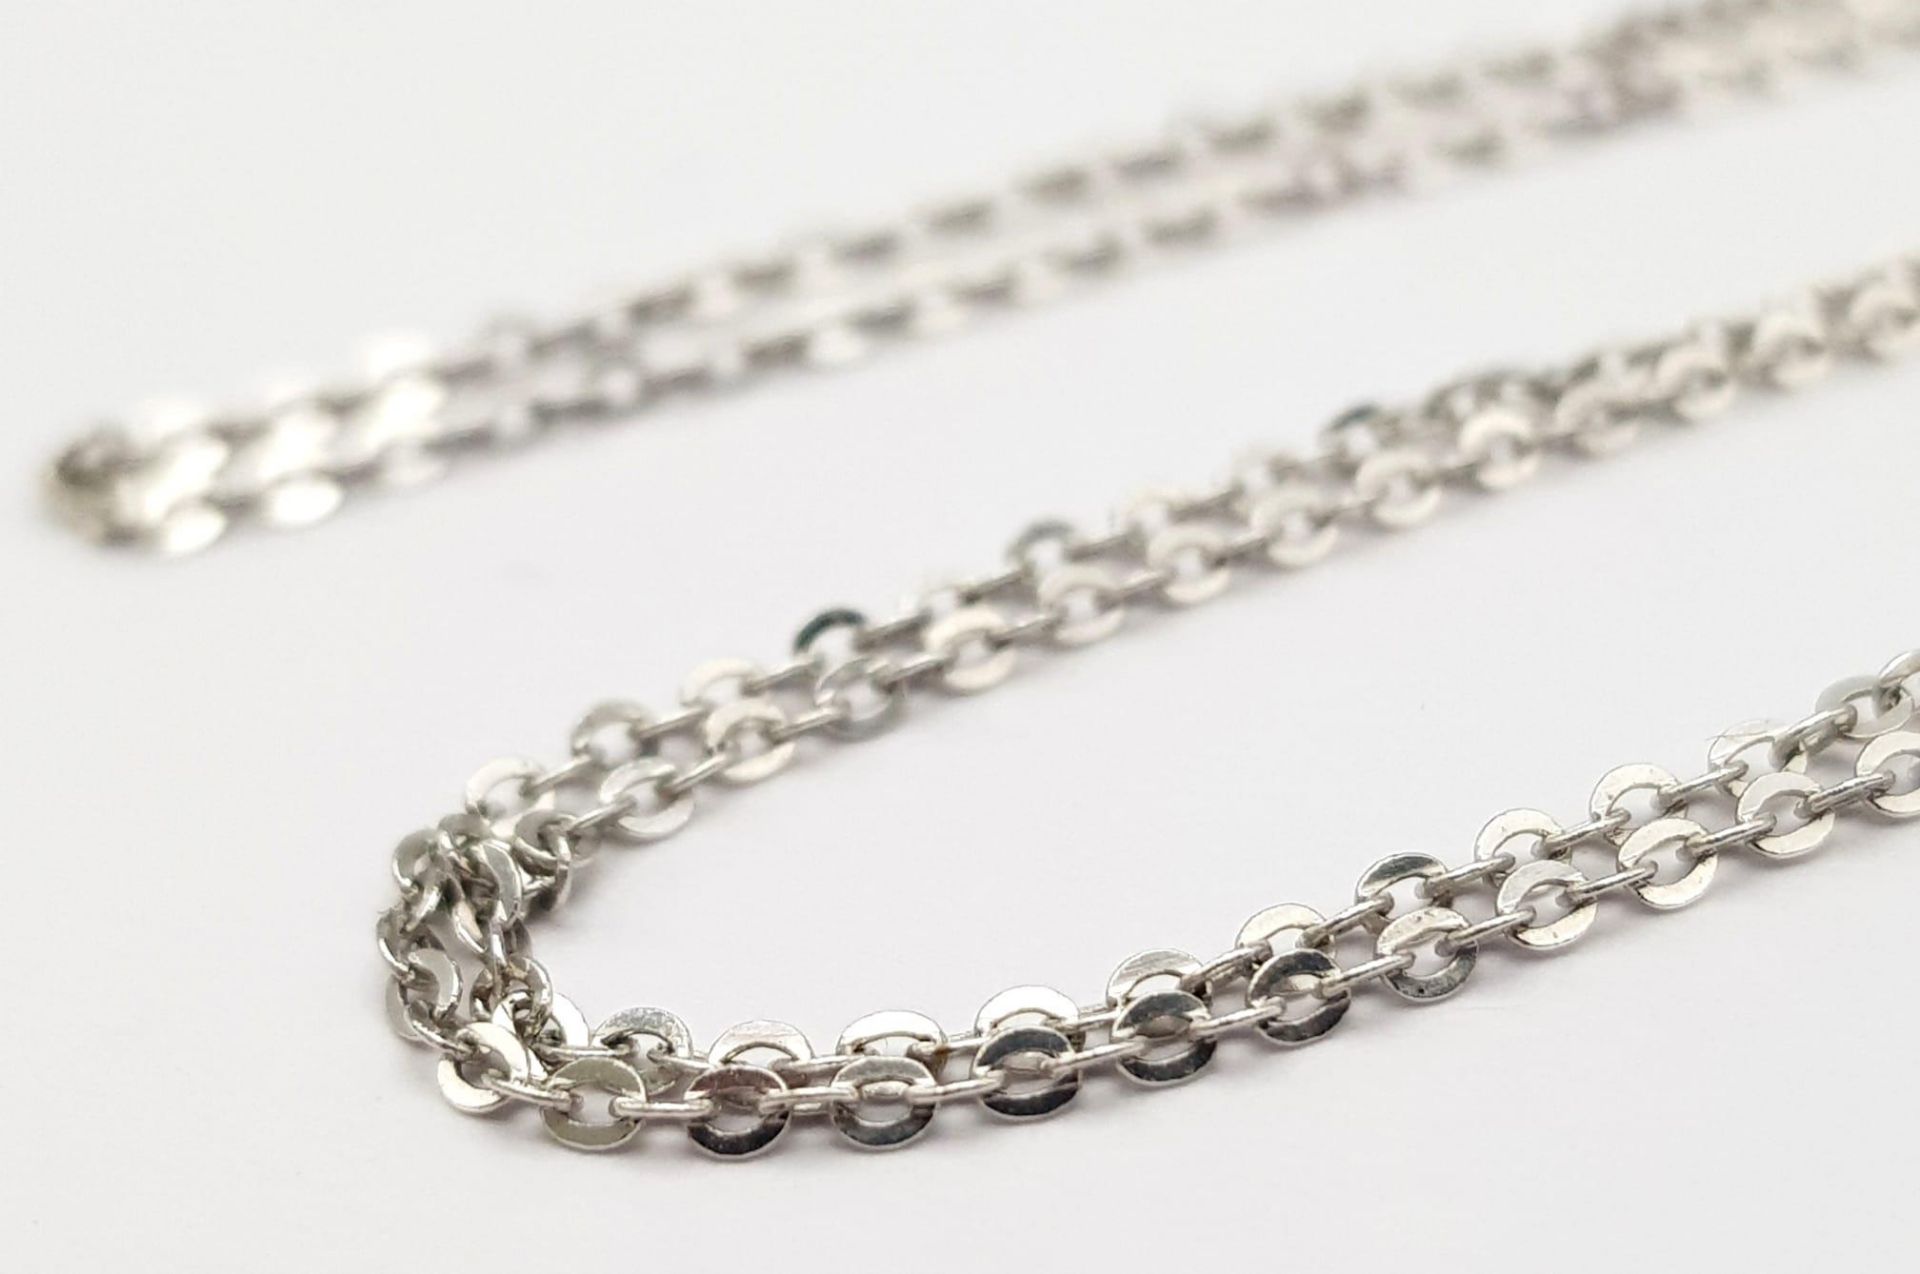 A DELICATE 18K WHITE GOLD TRACE LINK CHAIN, APPROX 20" LONG AND WEIGHT 2G - Image 2 of 4